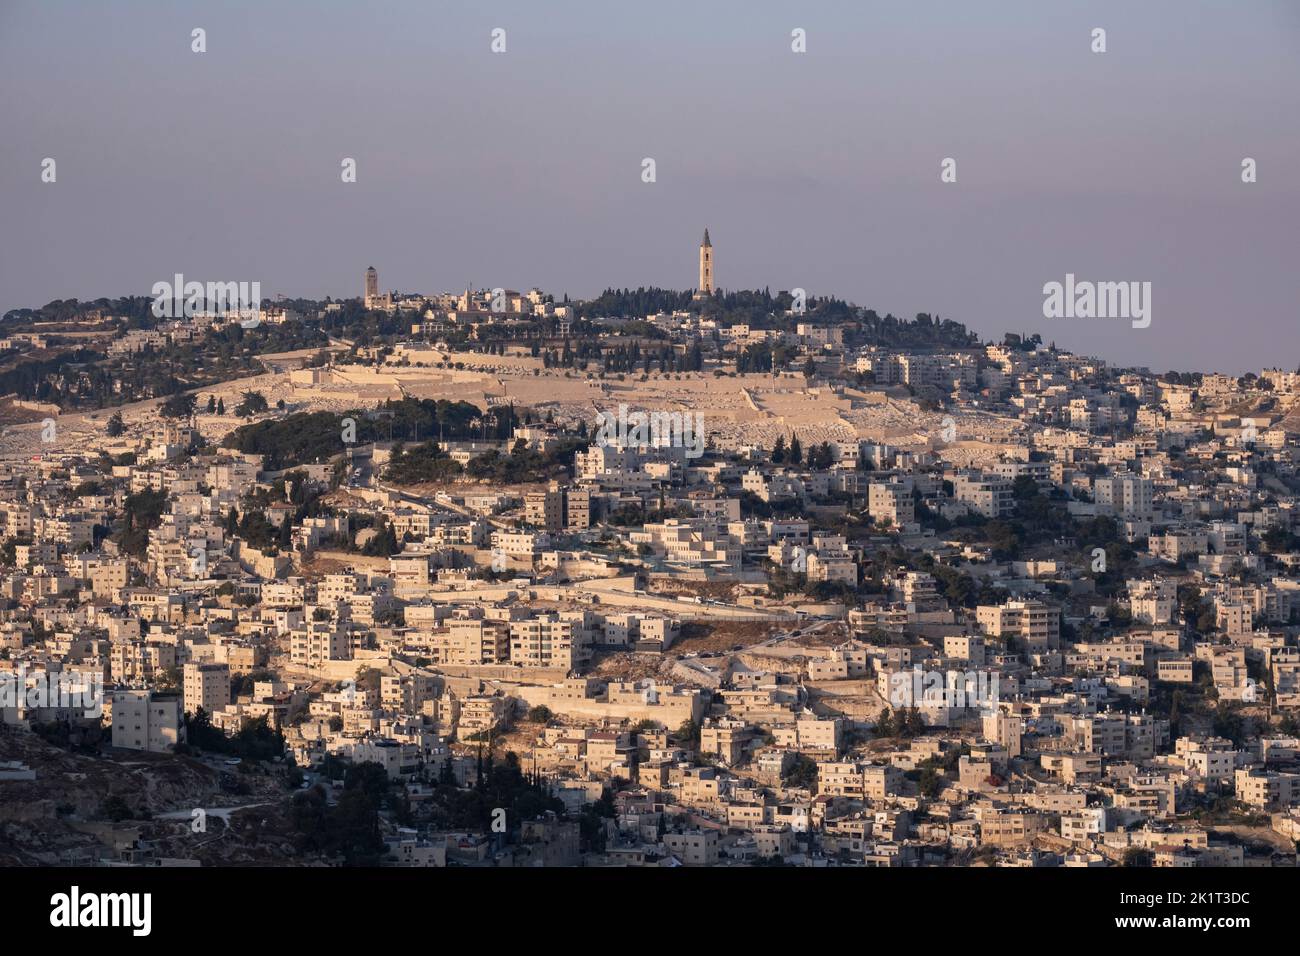 View of mount of Olives across the Palestinian neighborhoods of Ras al-Amud and Silwan in East Jerusalem, Israel Stock Photo